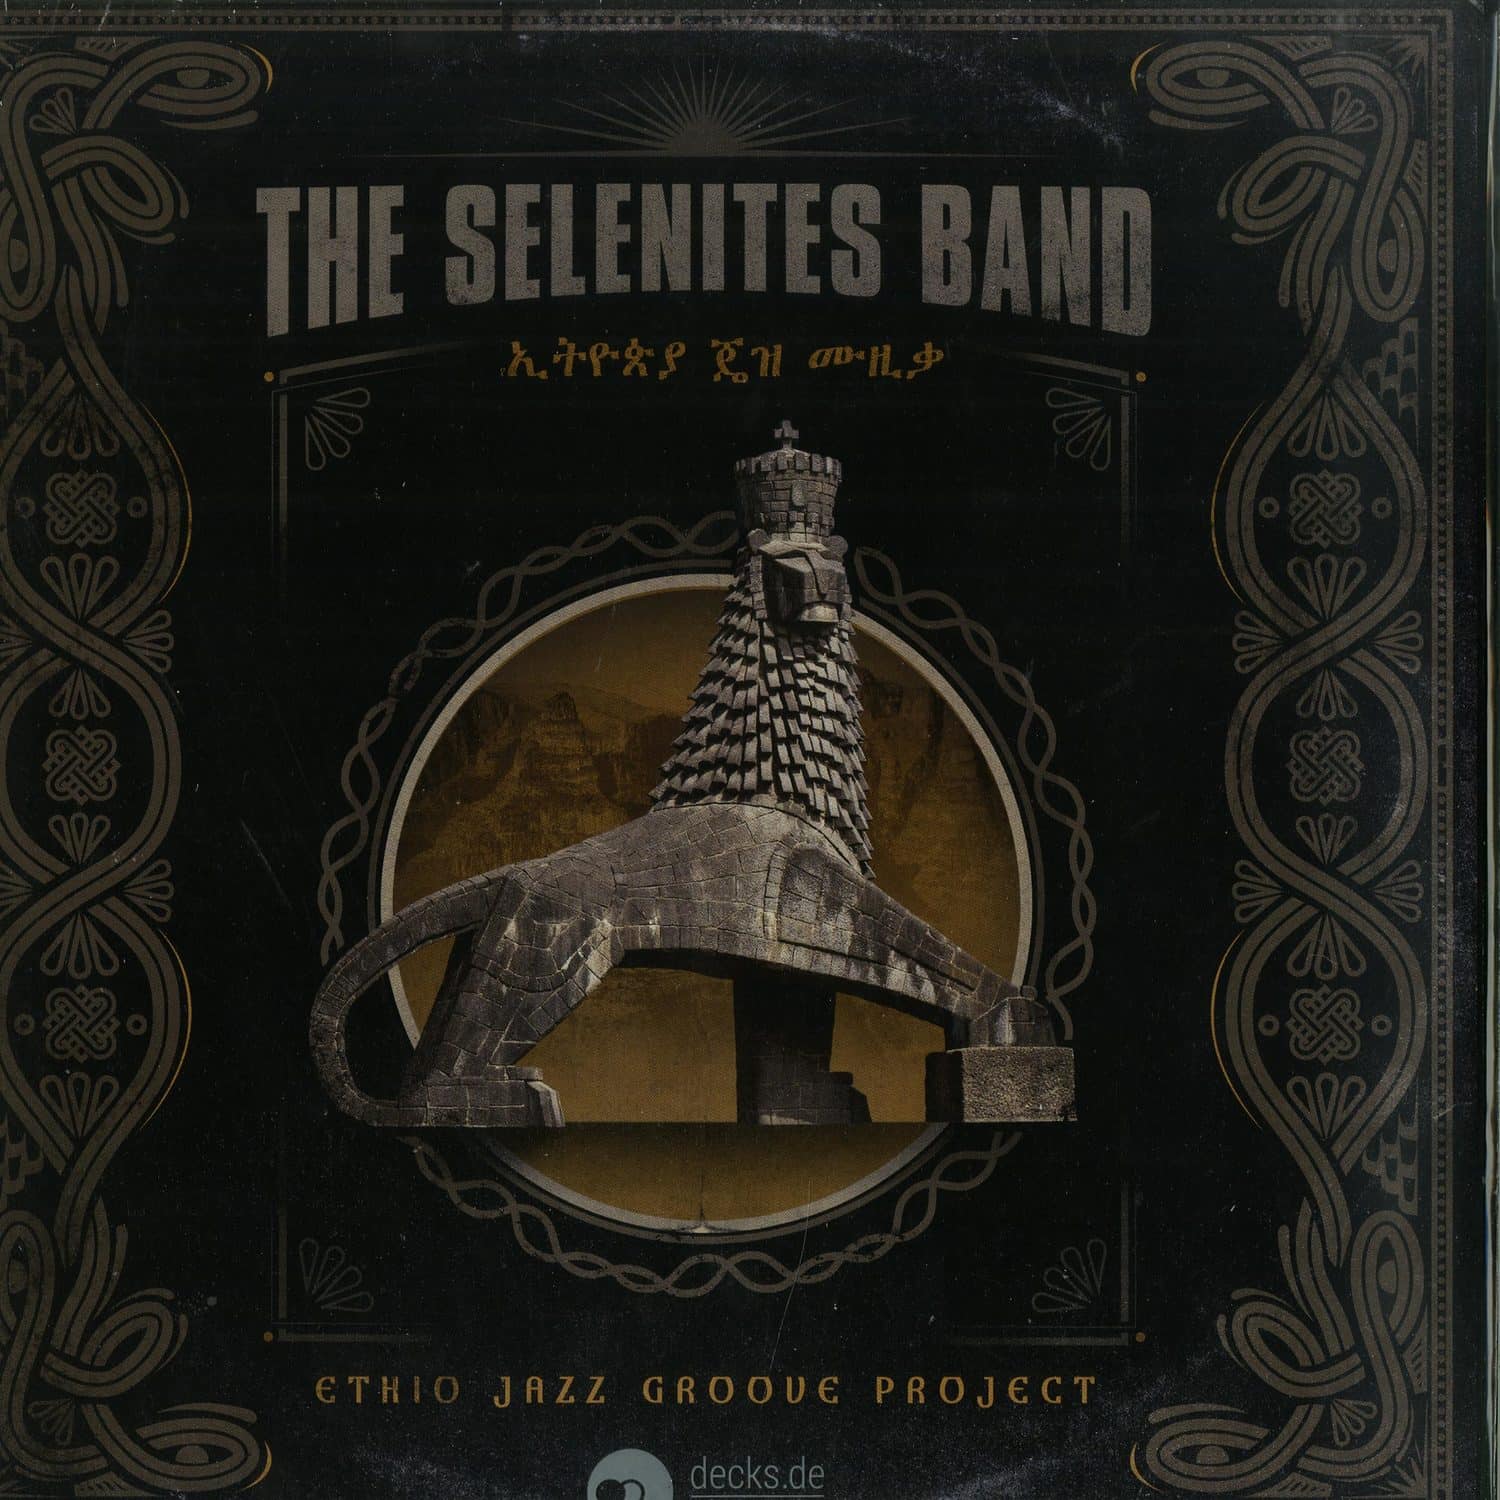 The Selenites Band - ETHIO JAZZ GROOVE PROJECT 